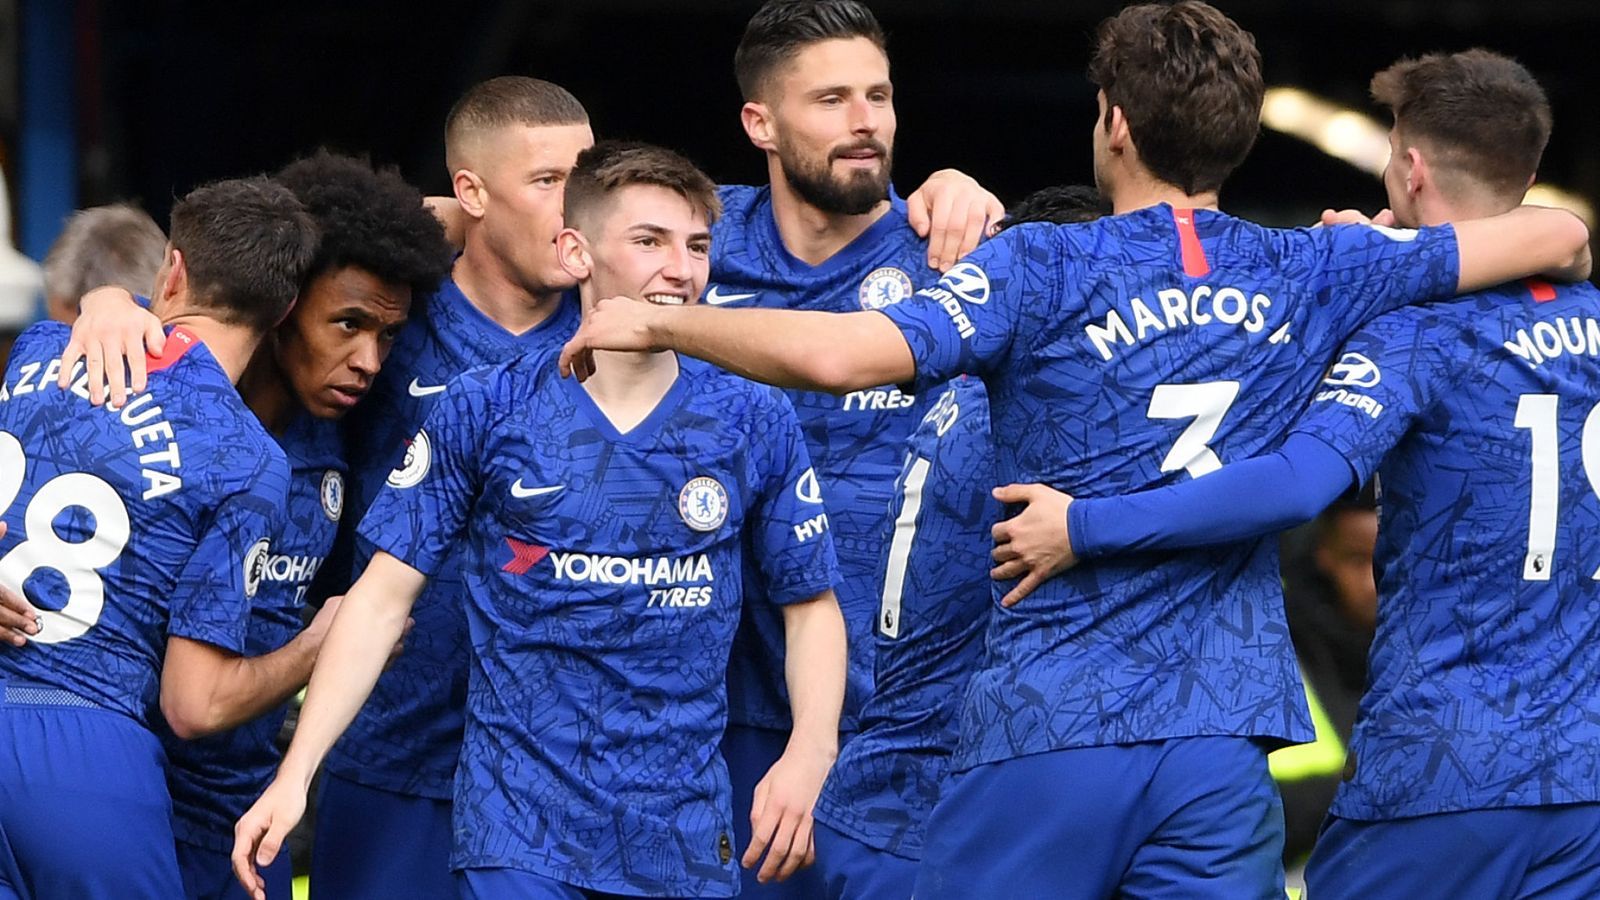 Billy Gilmour was the man of Chelsea's game against Everton